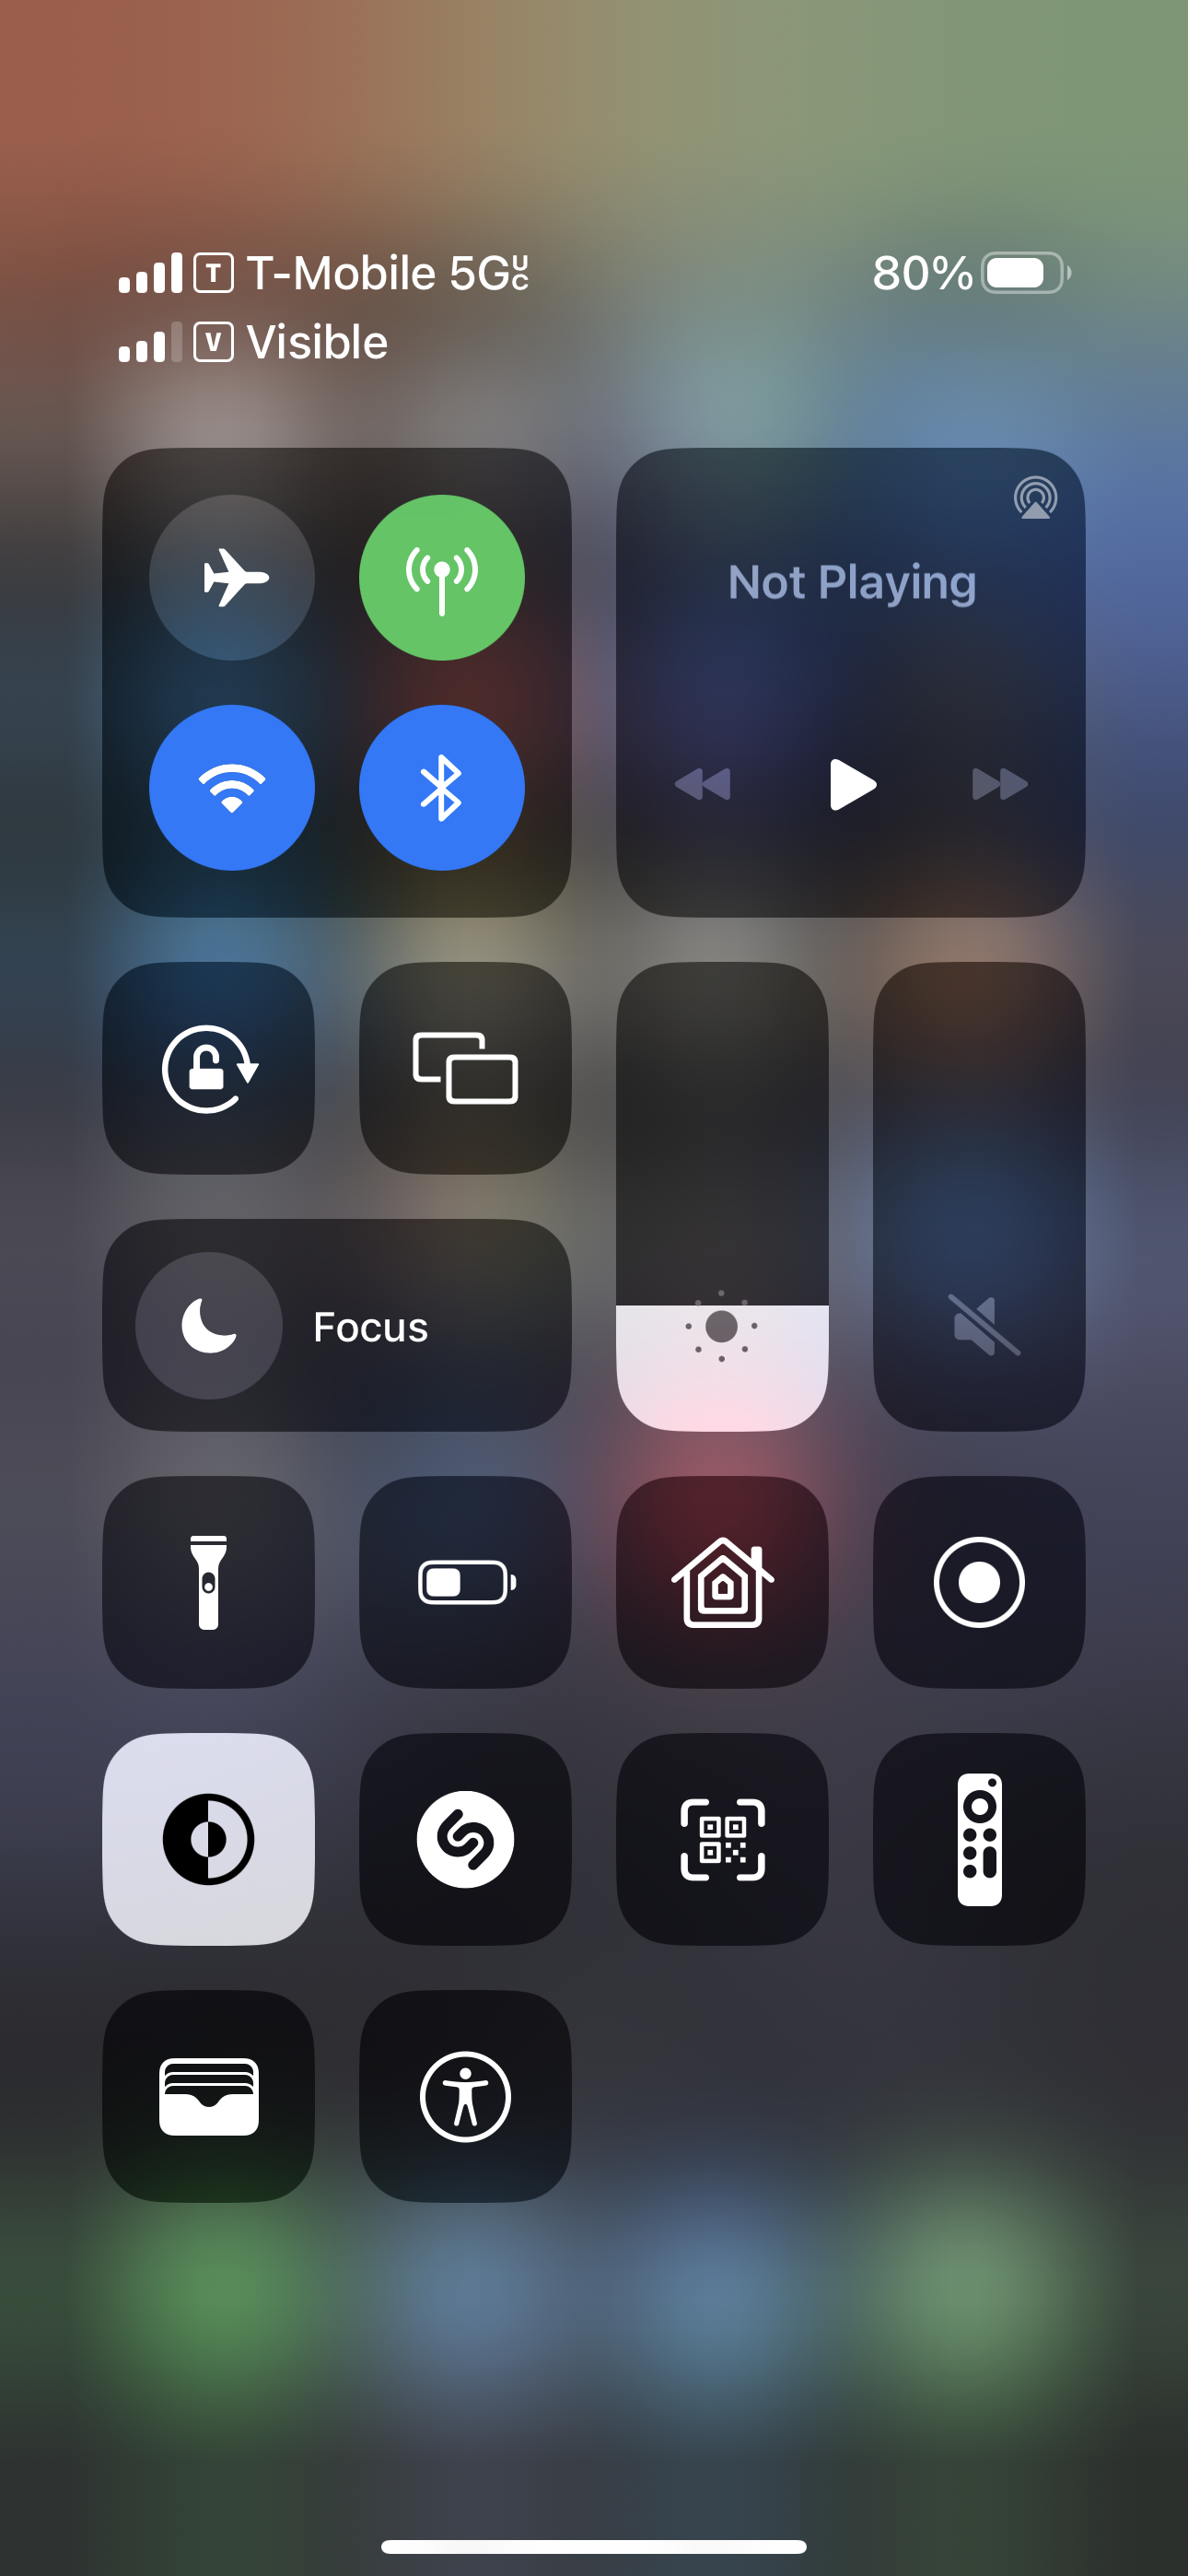 Control Center interface on an iPhone.